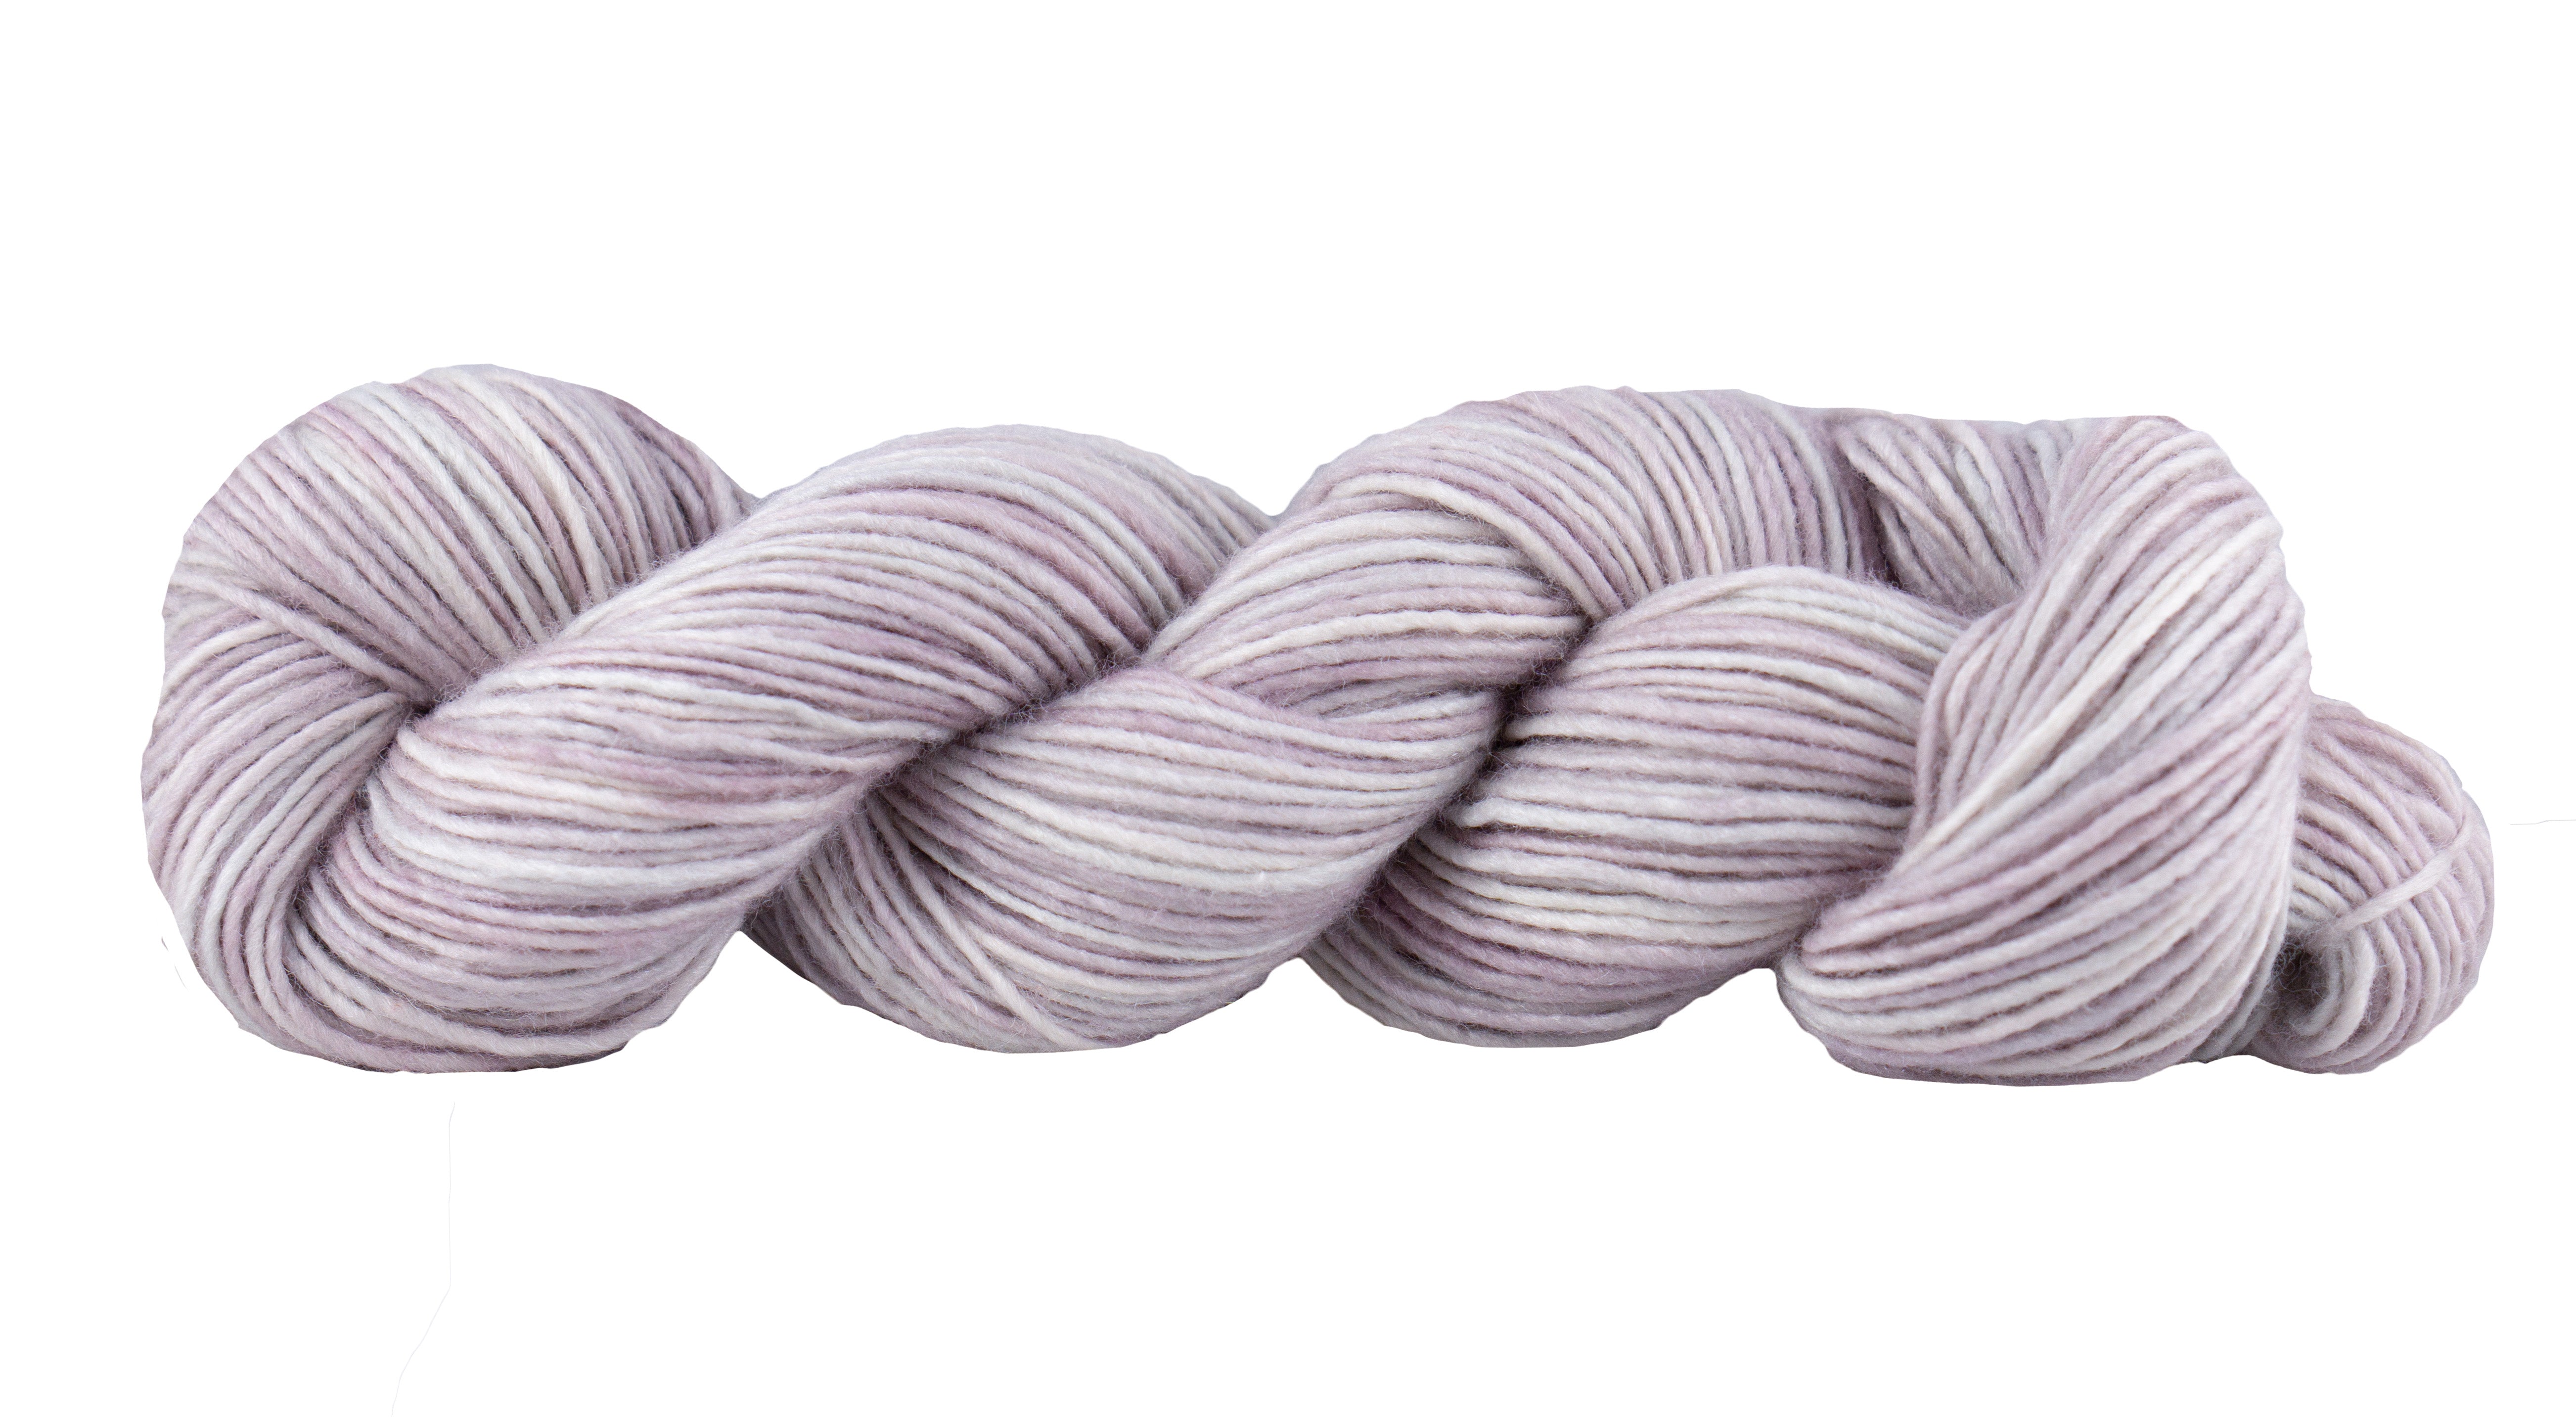 Skein of Manos del Uruguay Silk Blend Space-Dyed DK weight yarn in the color La Perla (Purple) for knitting and crocheting.